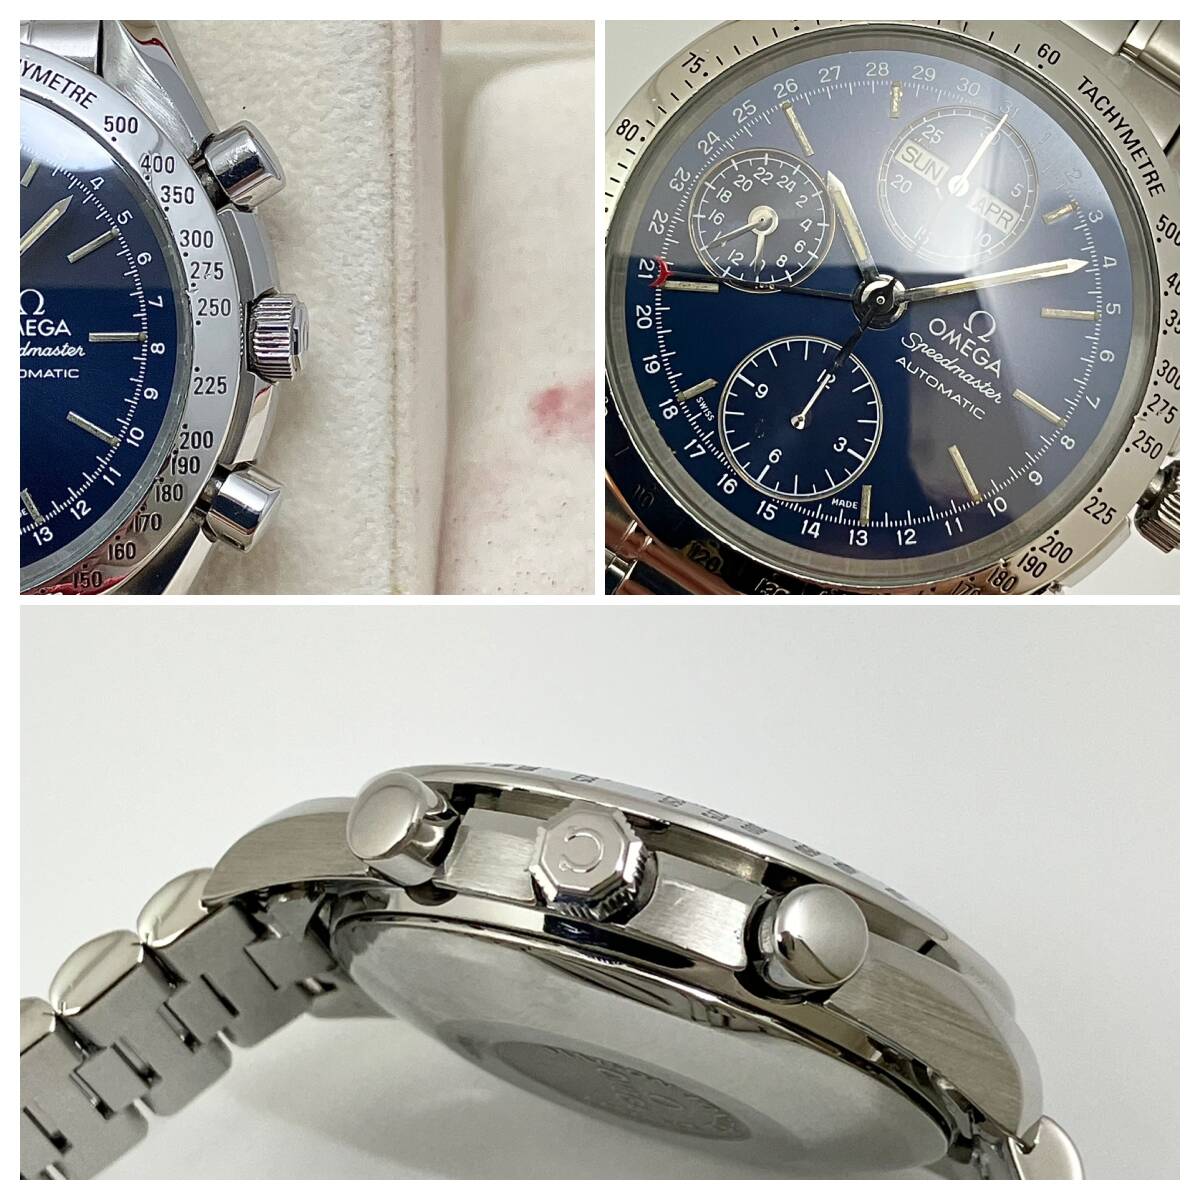  accessory all part, belt 2 kind attaching *OH ending ultimate beautiful goods. Omega * Speedmaster * clock * Triple calendar * navy record *3521-80*